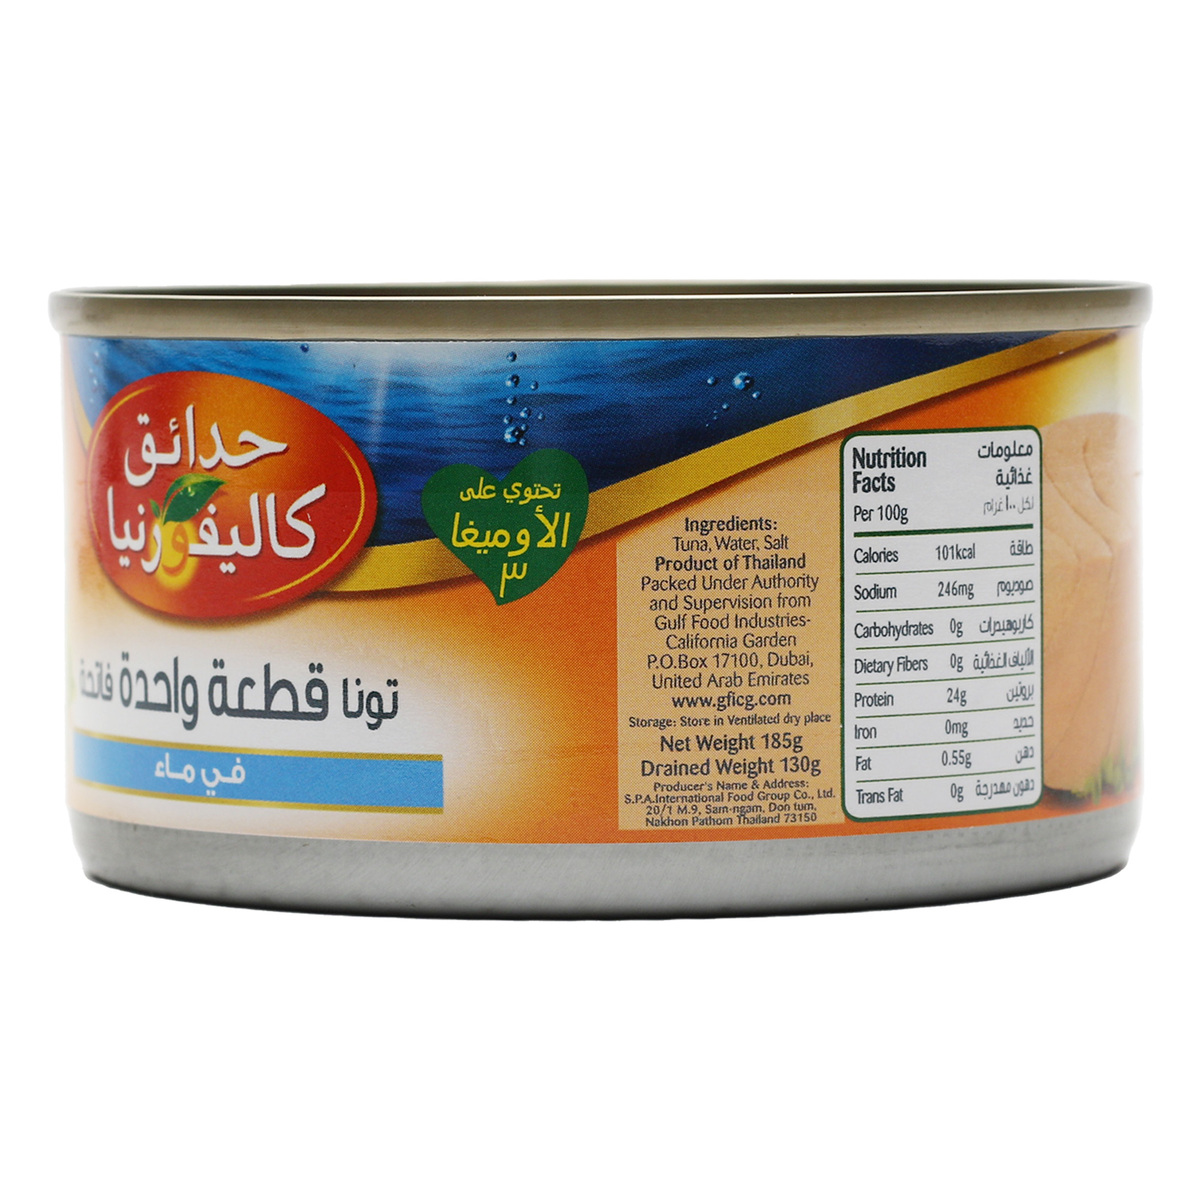 California Garden White Solid Tuna In Water Value Pack 3 x 100g